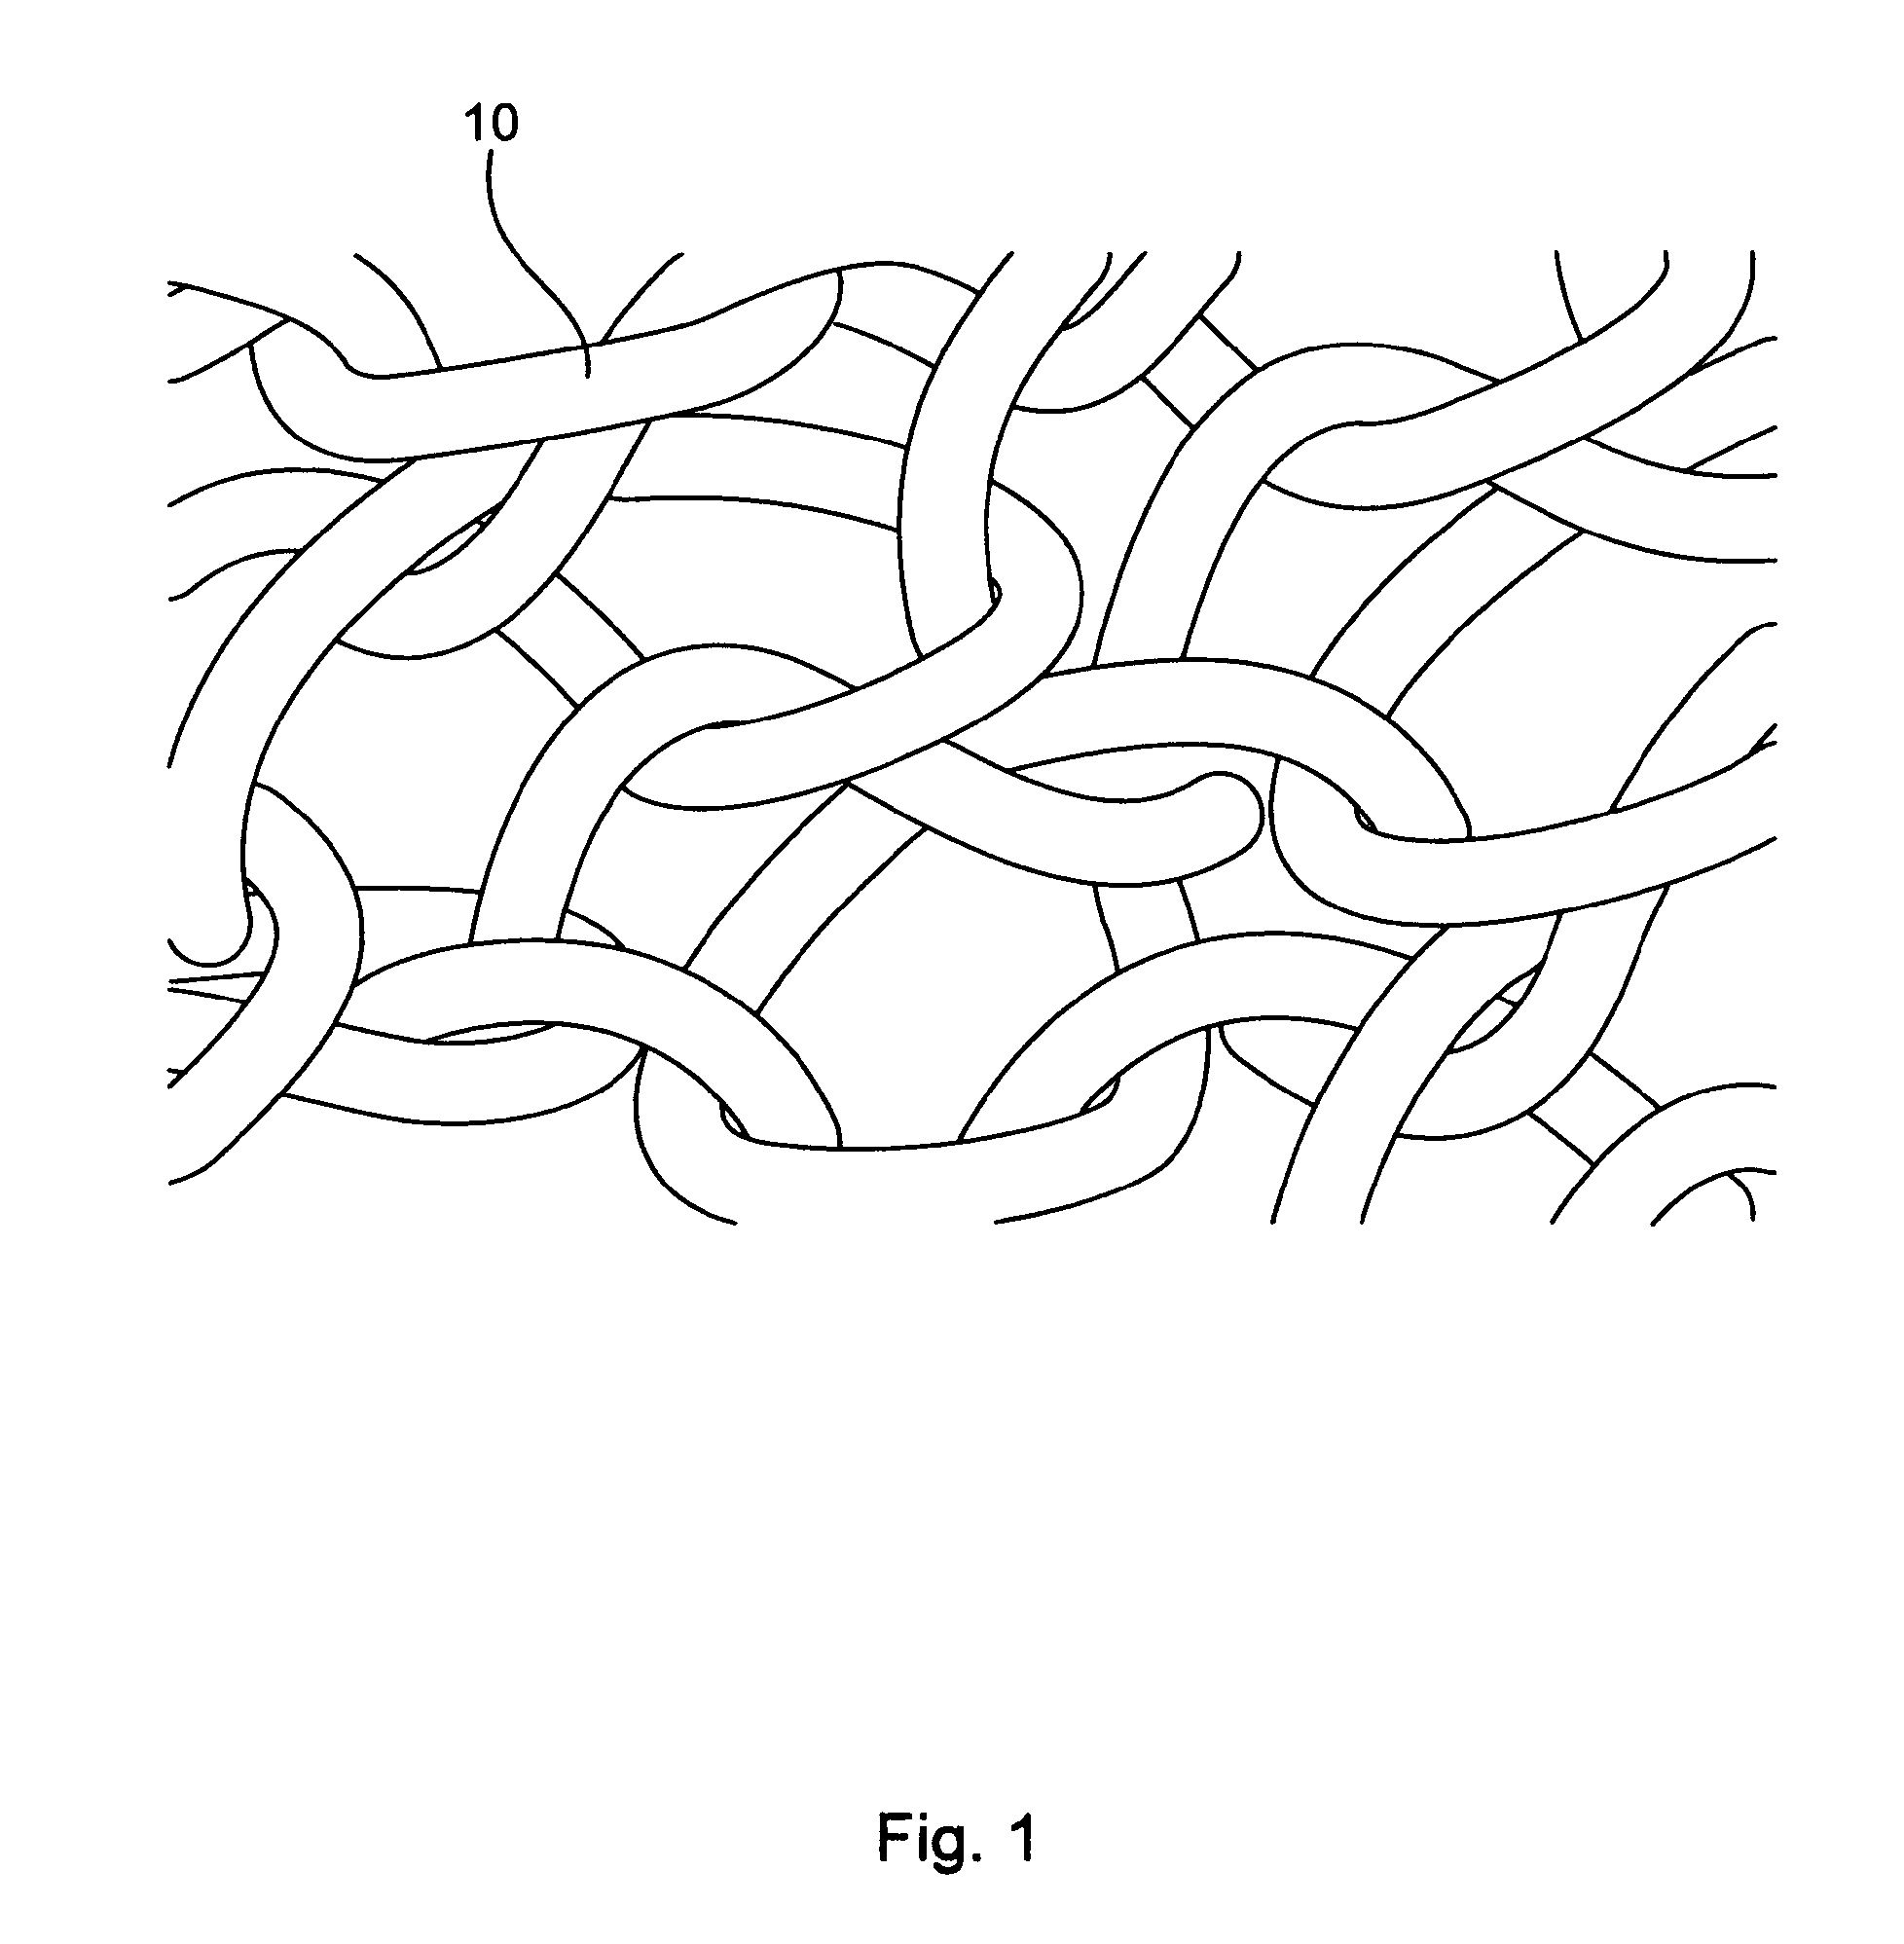 Device Suitable for Use During Deployment of a Medical Device